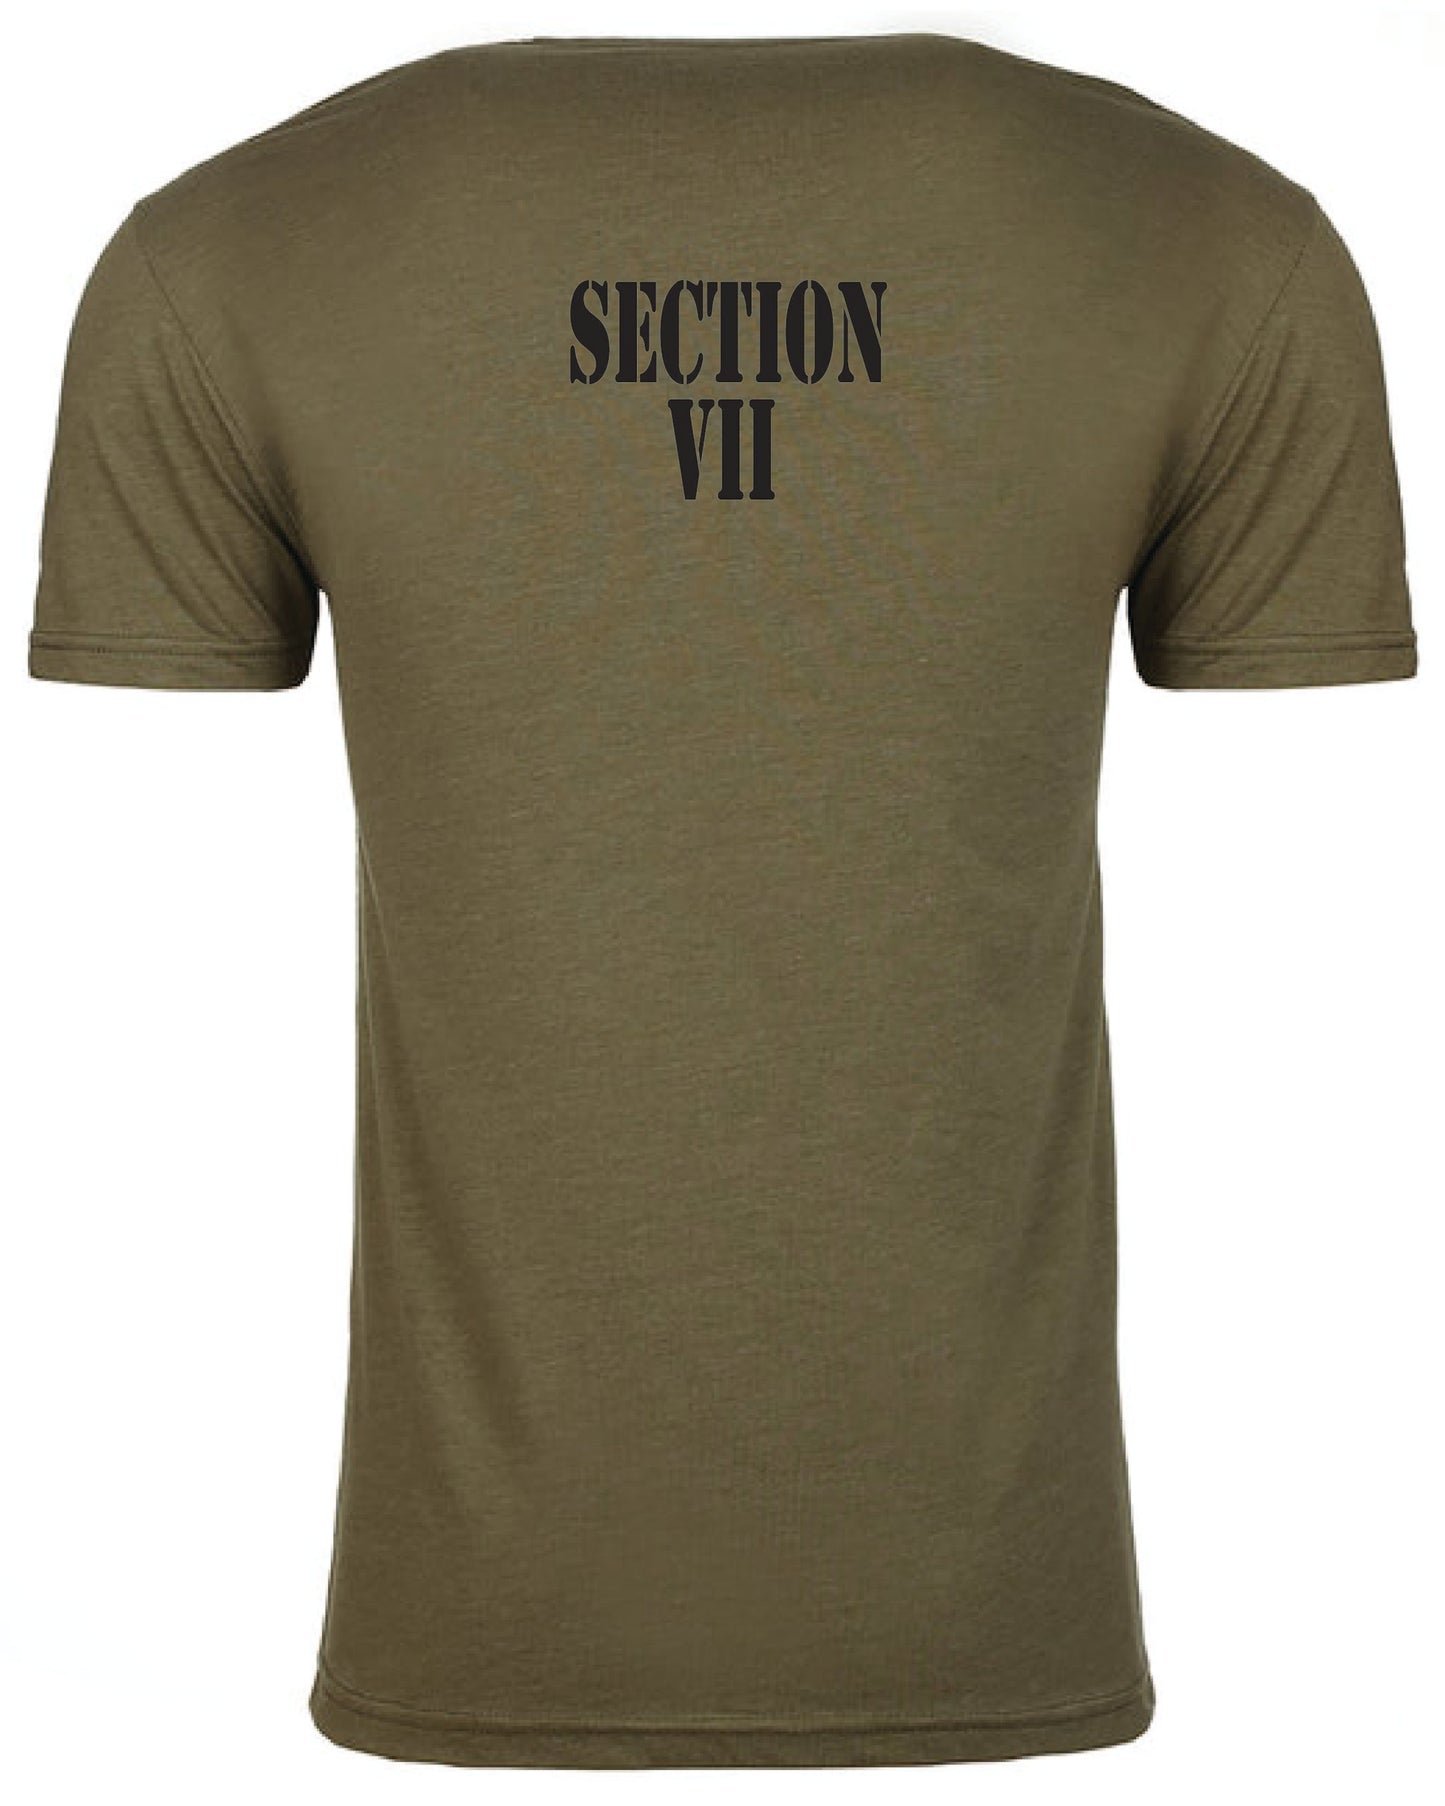 Section VII Armed Forces